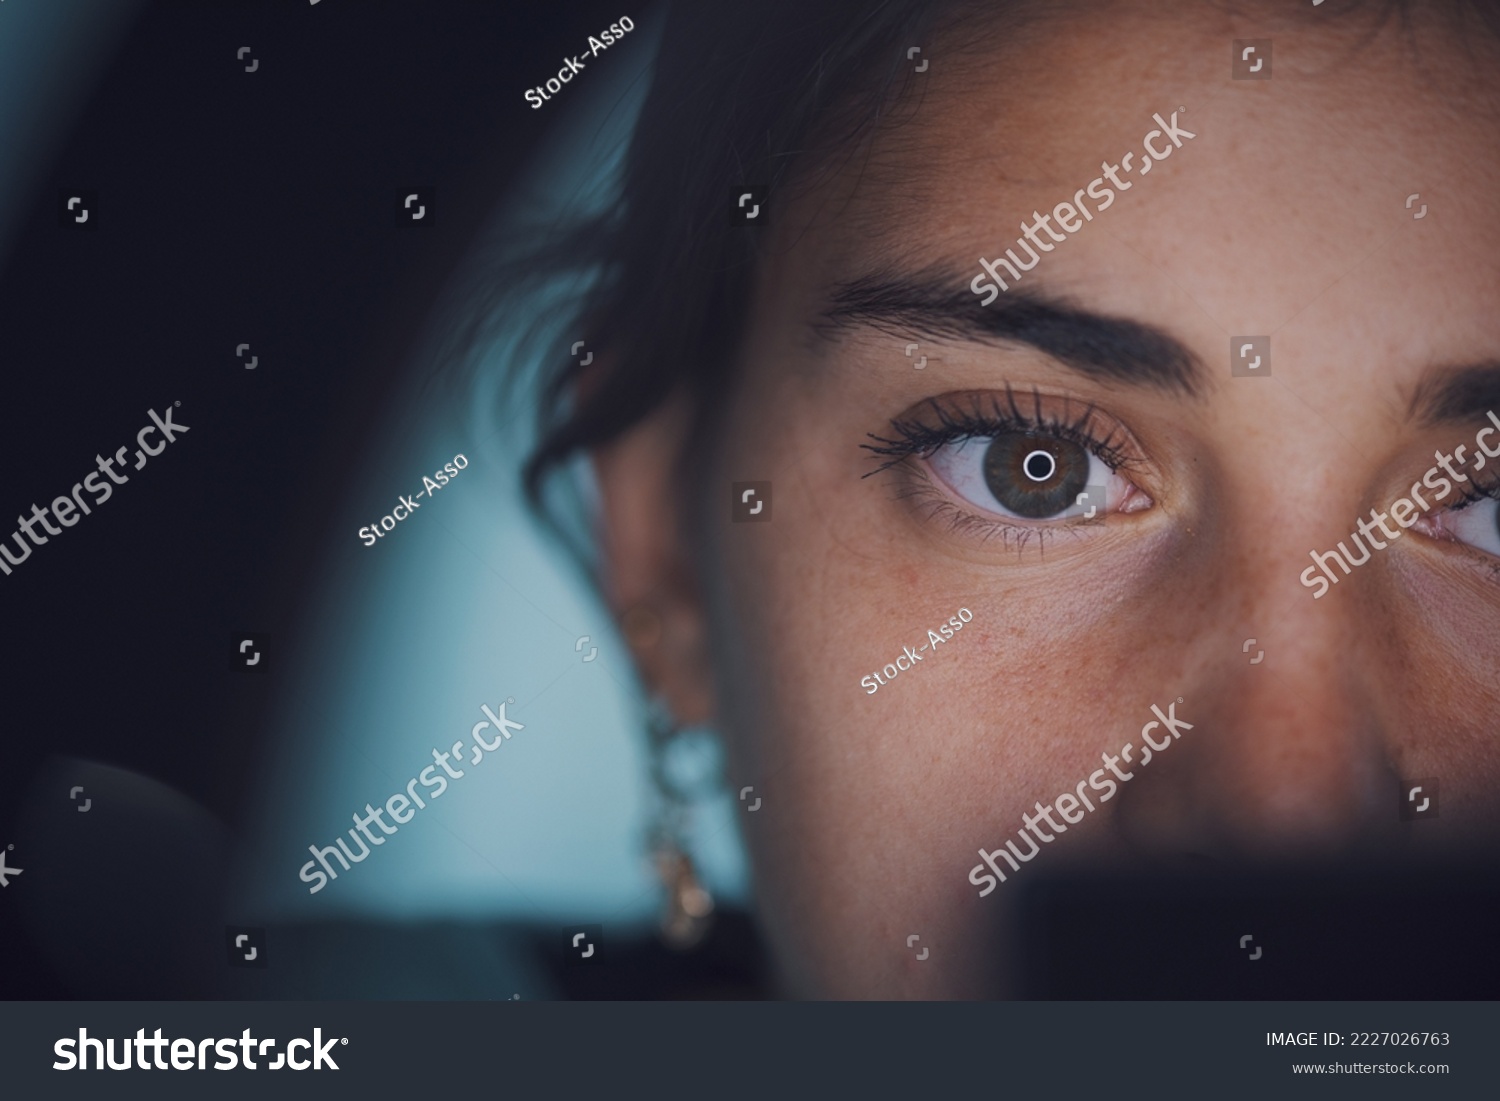 Ring light reflecting in woman's eye, face close up #2227026763